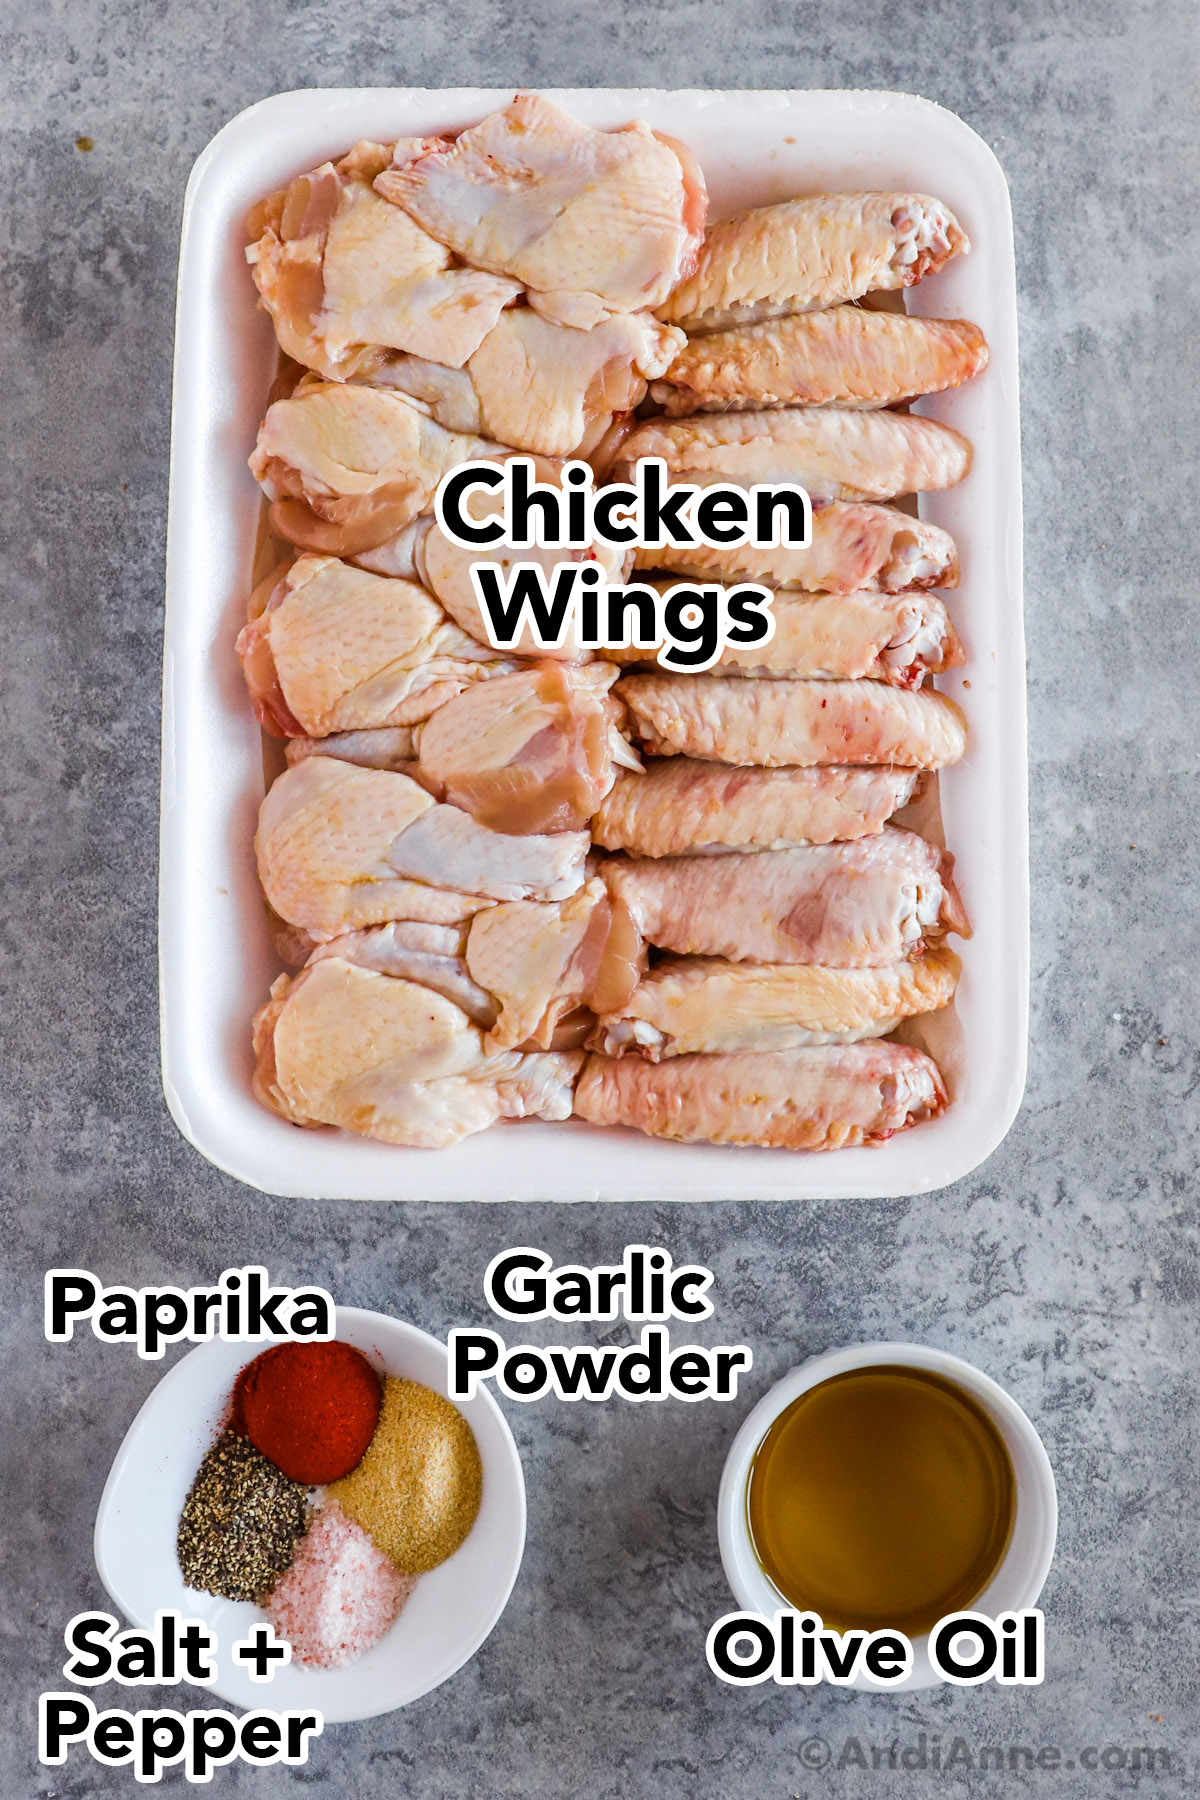 Recipe ingredients including raw chicken wings, bowl of olive oil, and several spices on a small dish.